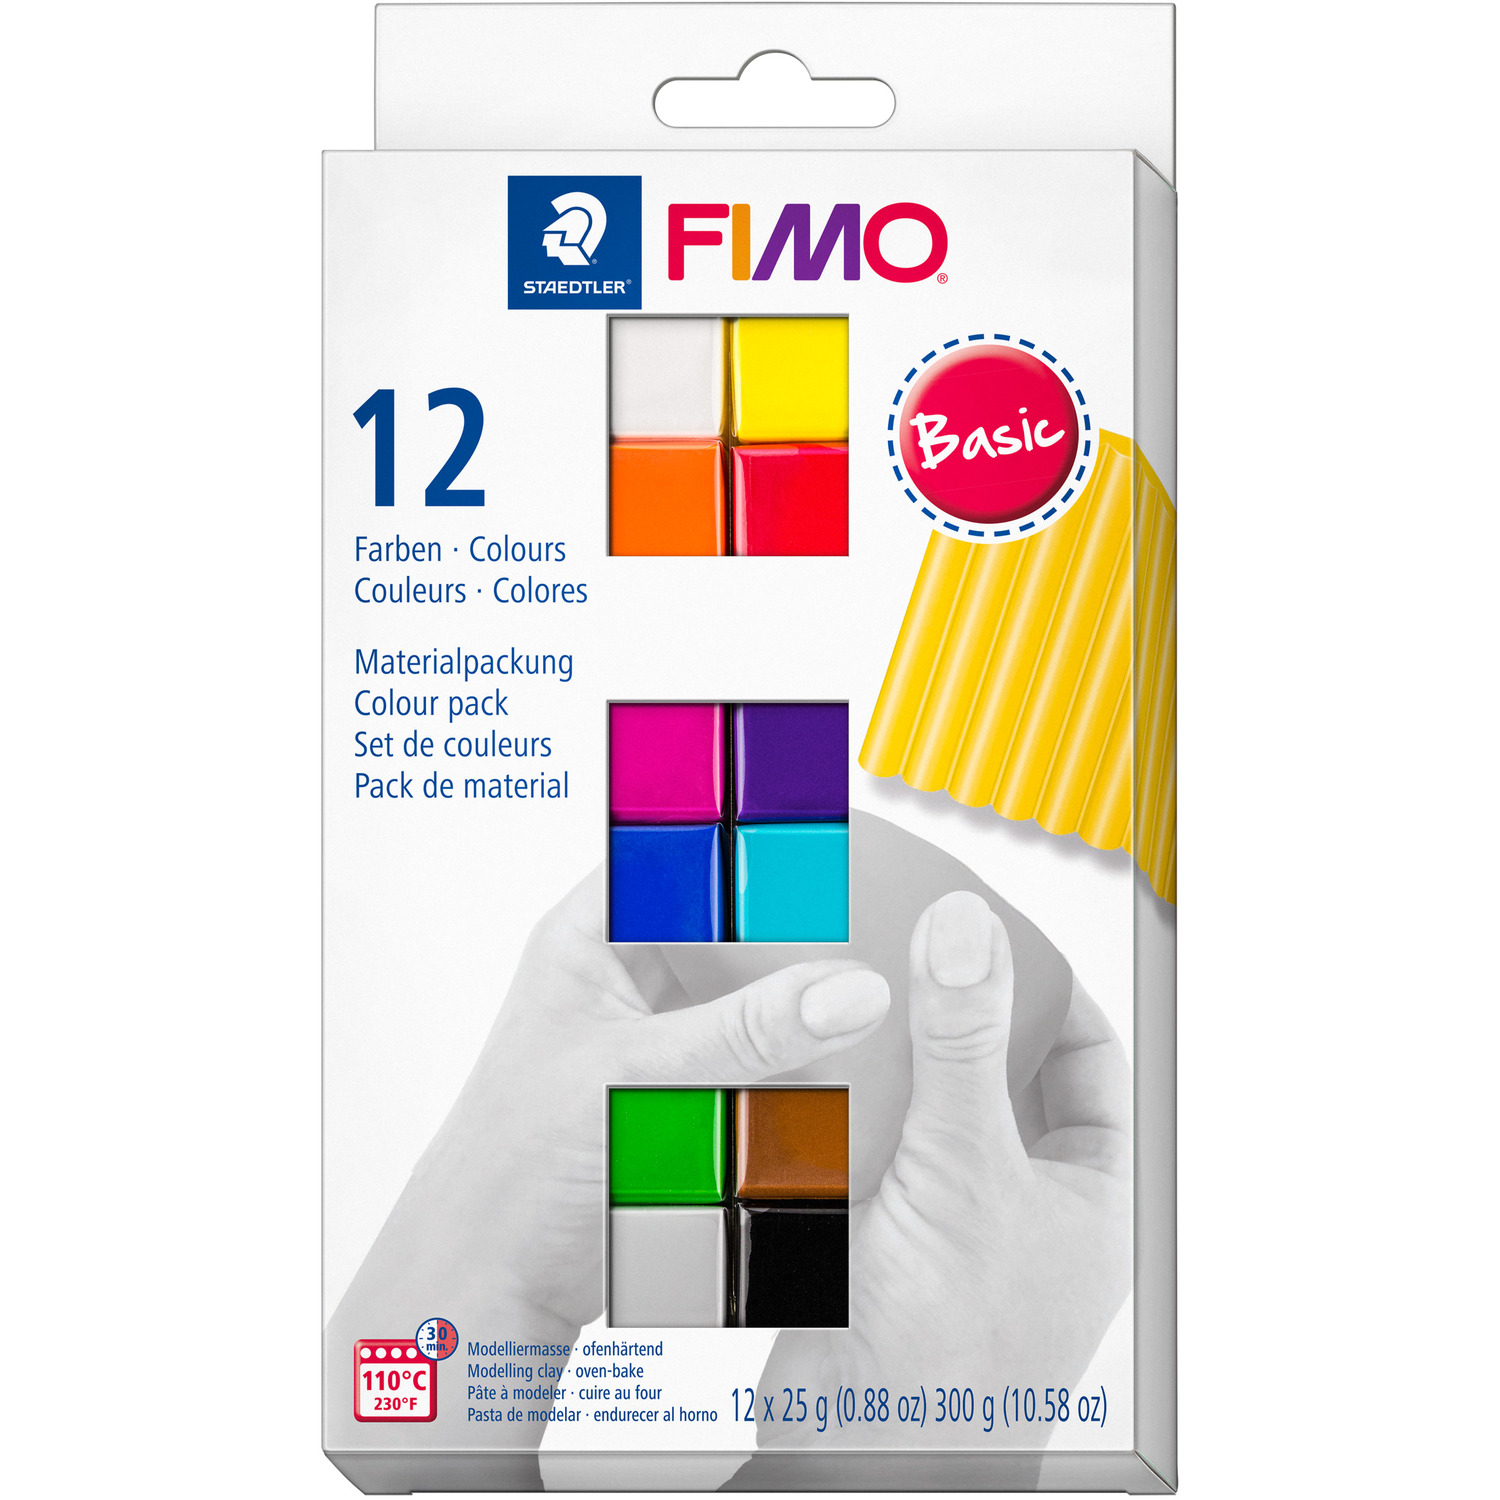 Staedtler Fimo Soft Modelling Clay Basic Colours 12 Pack Image 1